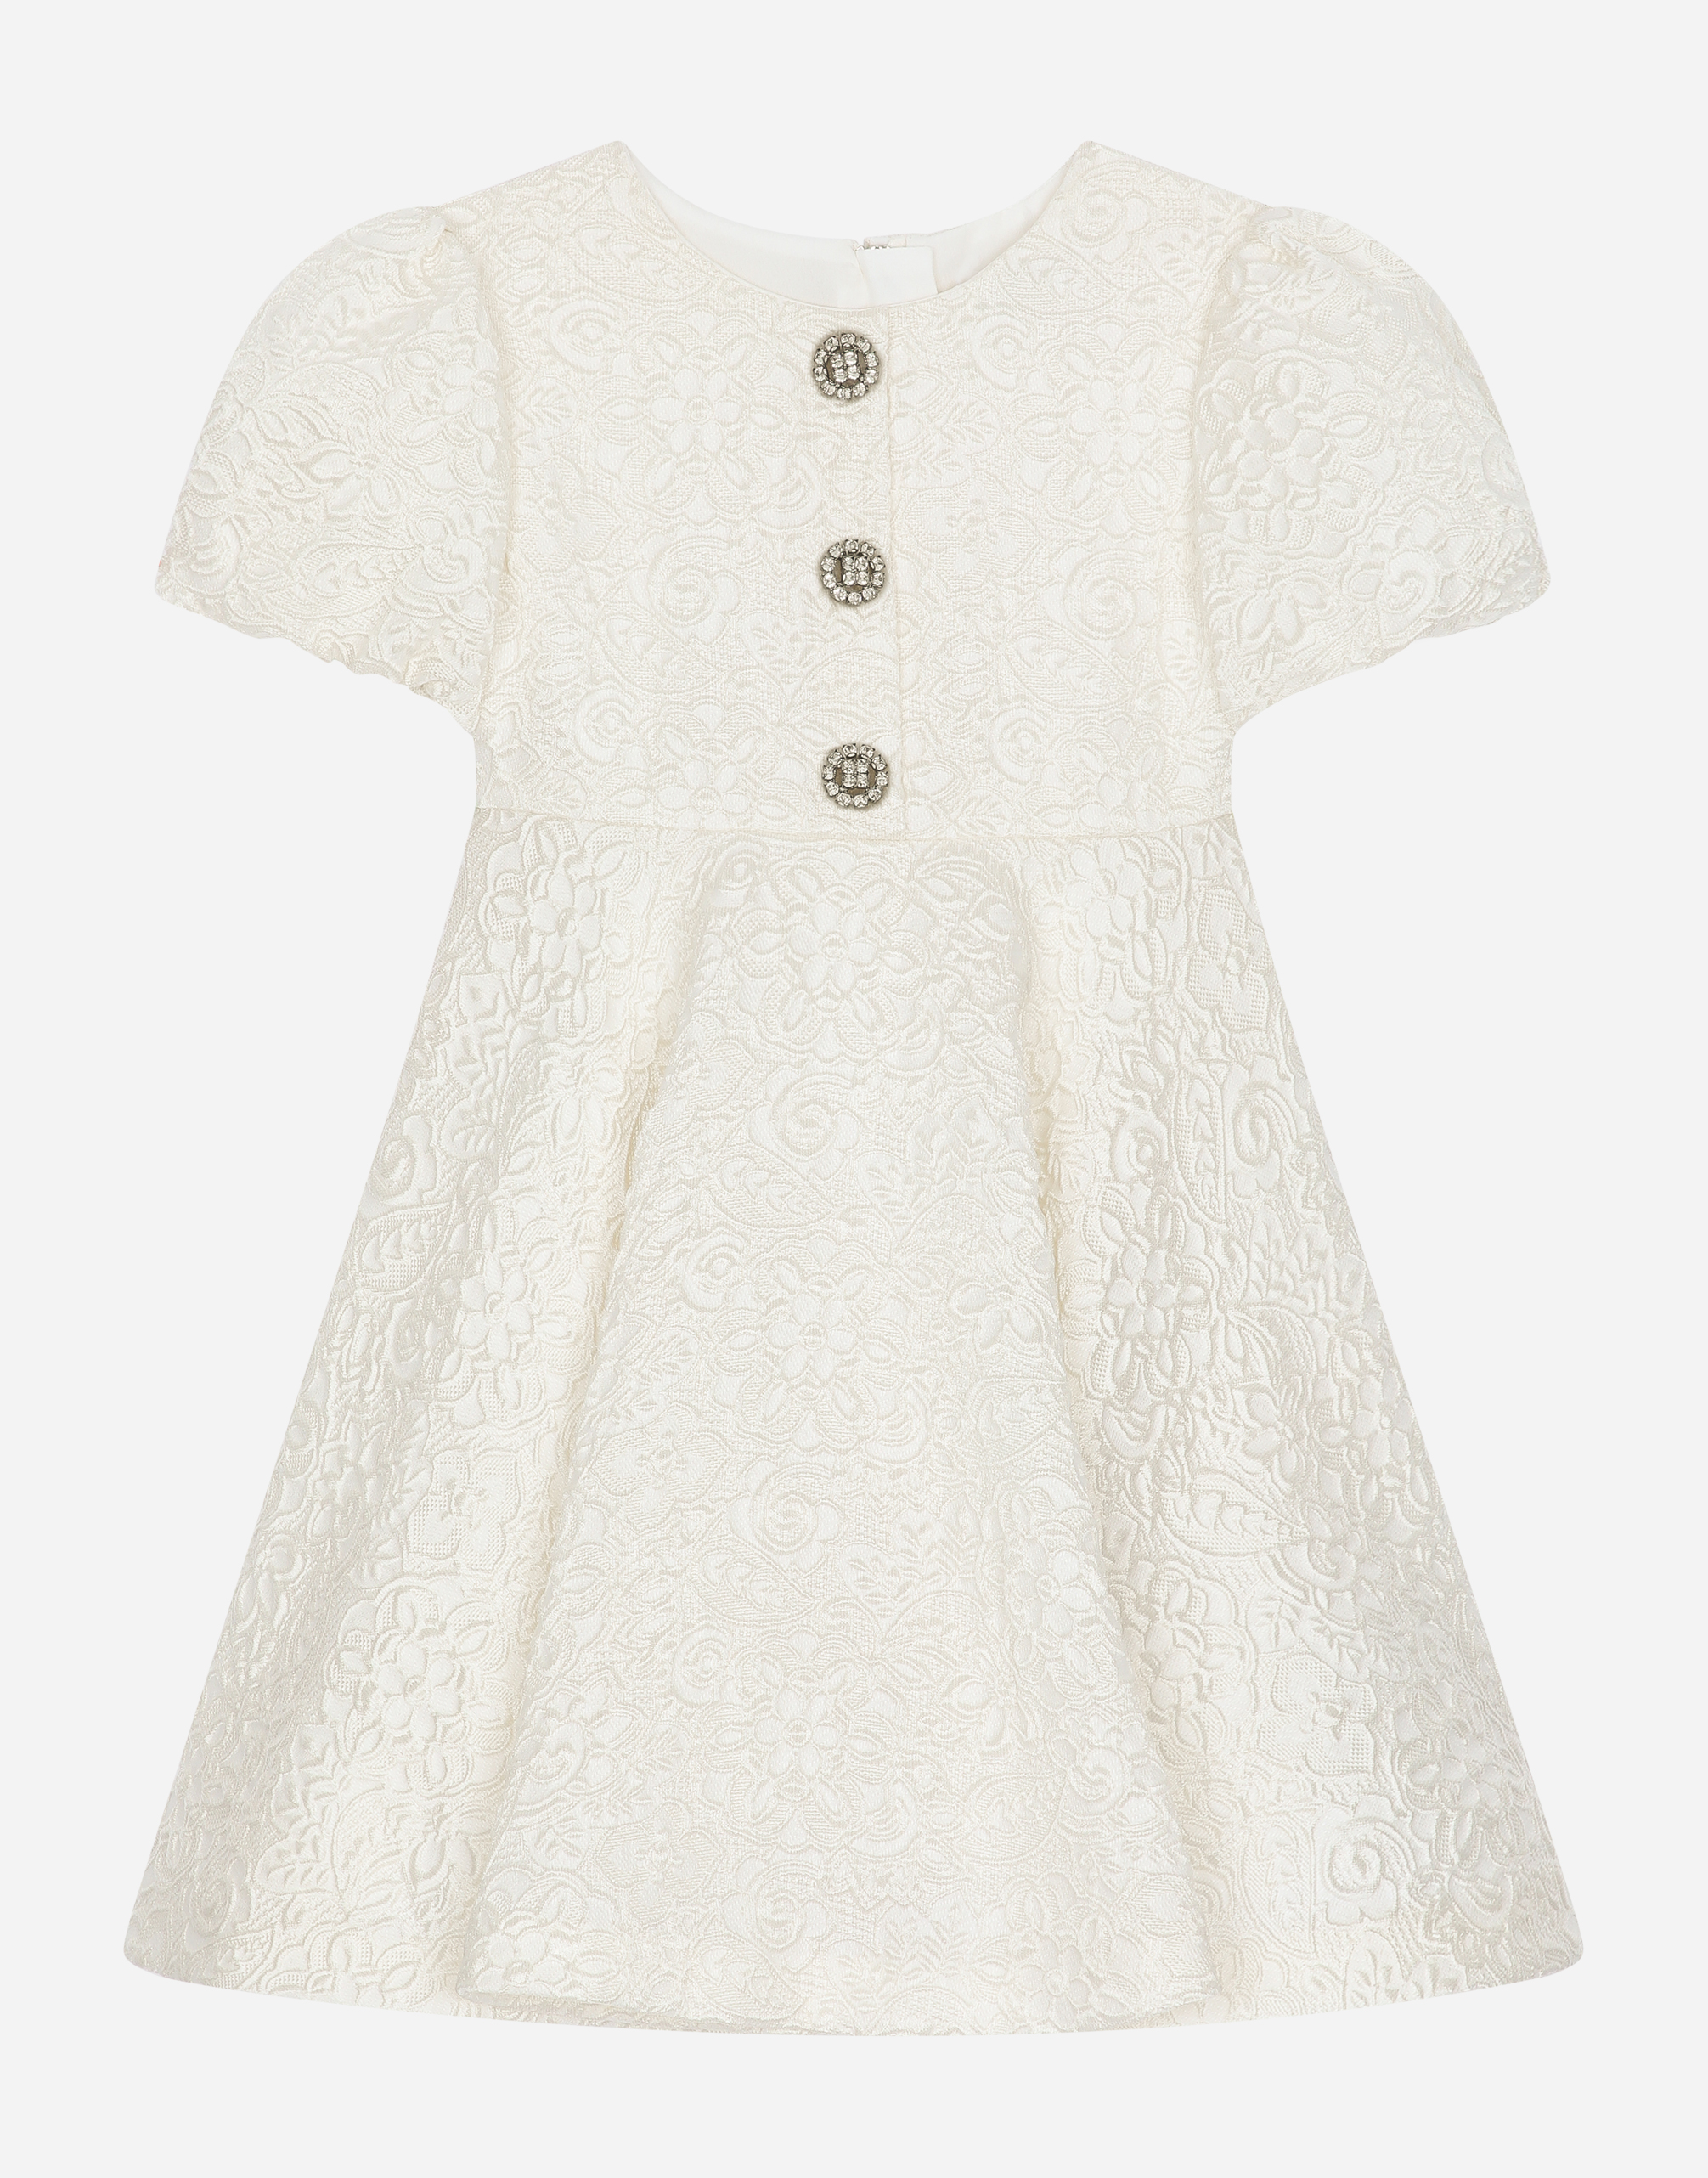 Dolce & Gabbana Kids' Jacquard Midi Dress With Bejeweled Buttons In White